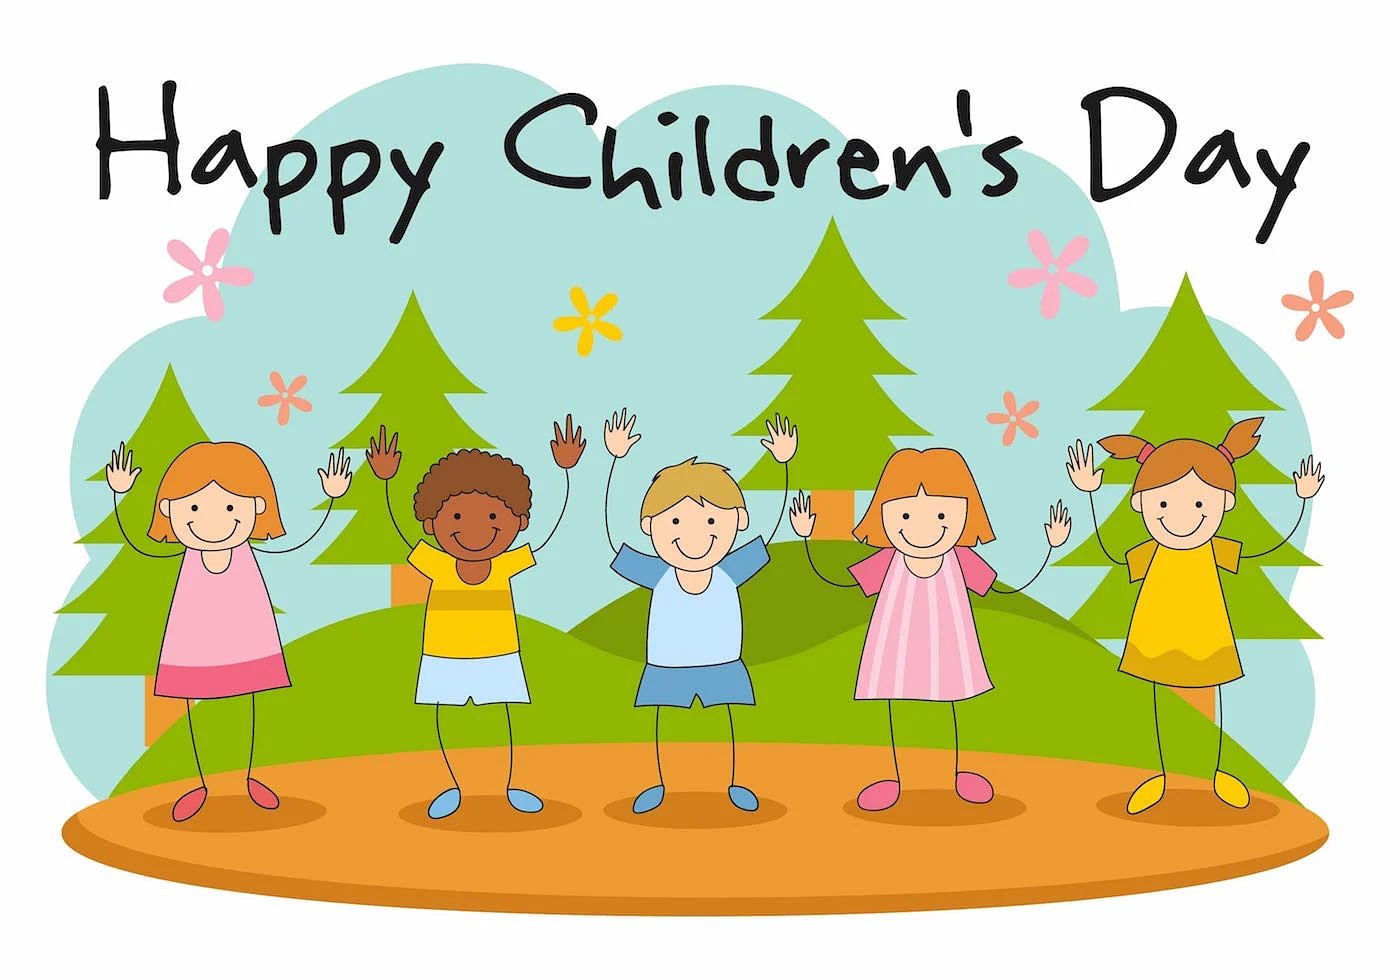 Happy Children's Day 2021 Theme, History And Significance